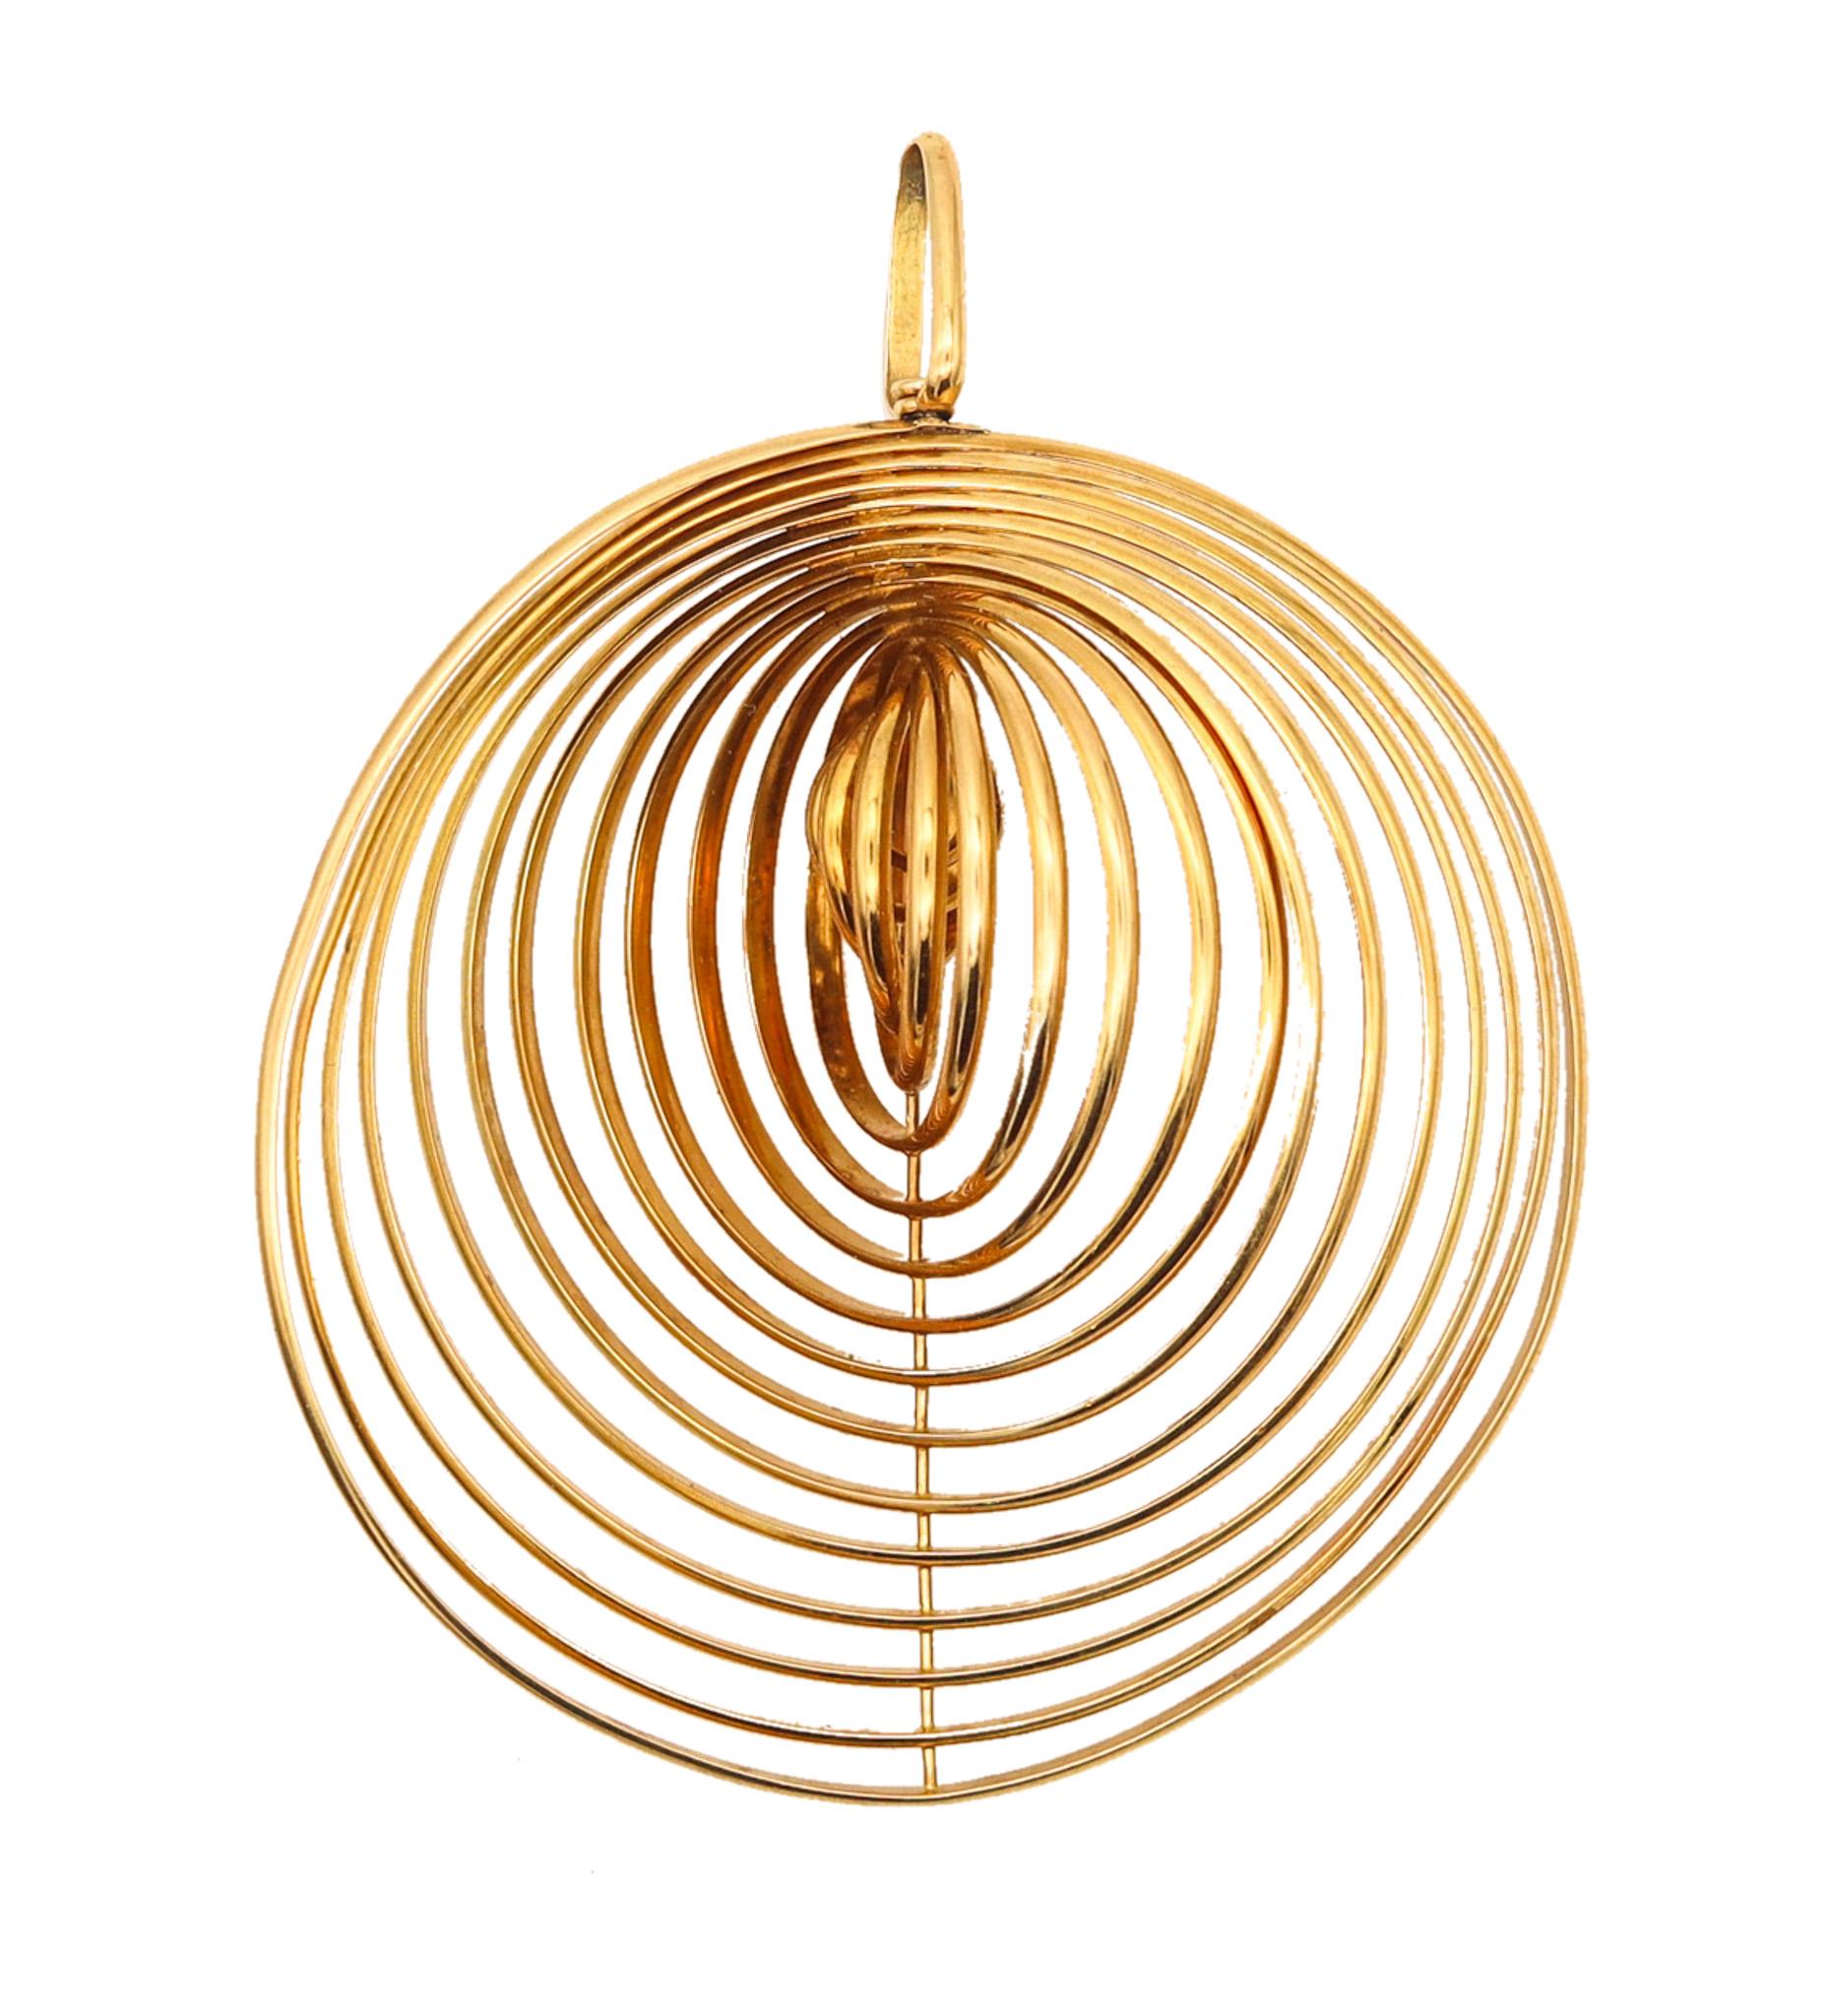 An Italian modernist sculptural pendant.

An amazing sculptural pendant, made in Italy with ultra modernism patterns, back in the 1970. This Op-art pendant is composed by seventeen concentric circles mounted in an axis creating a three-dimensional